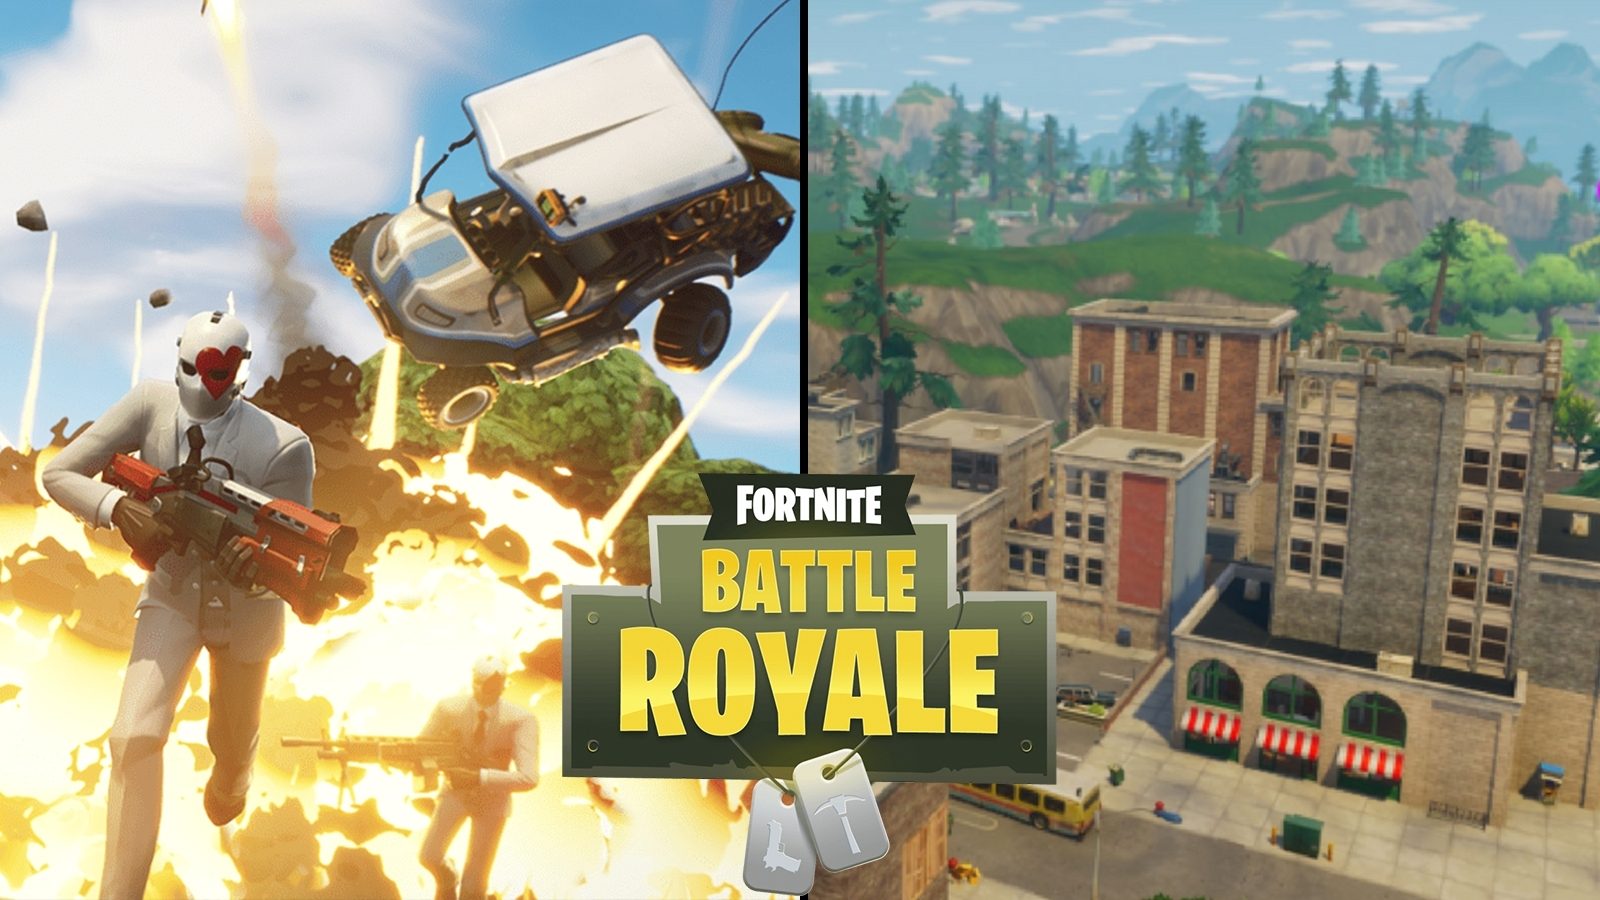 Tilted Towers may get destroyed according to new Fortnite Battle Royale  leak - Dexerto